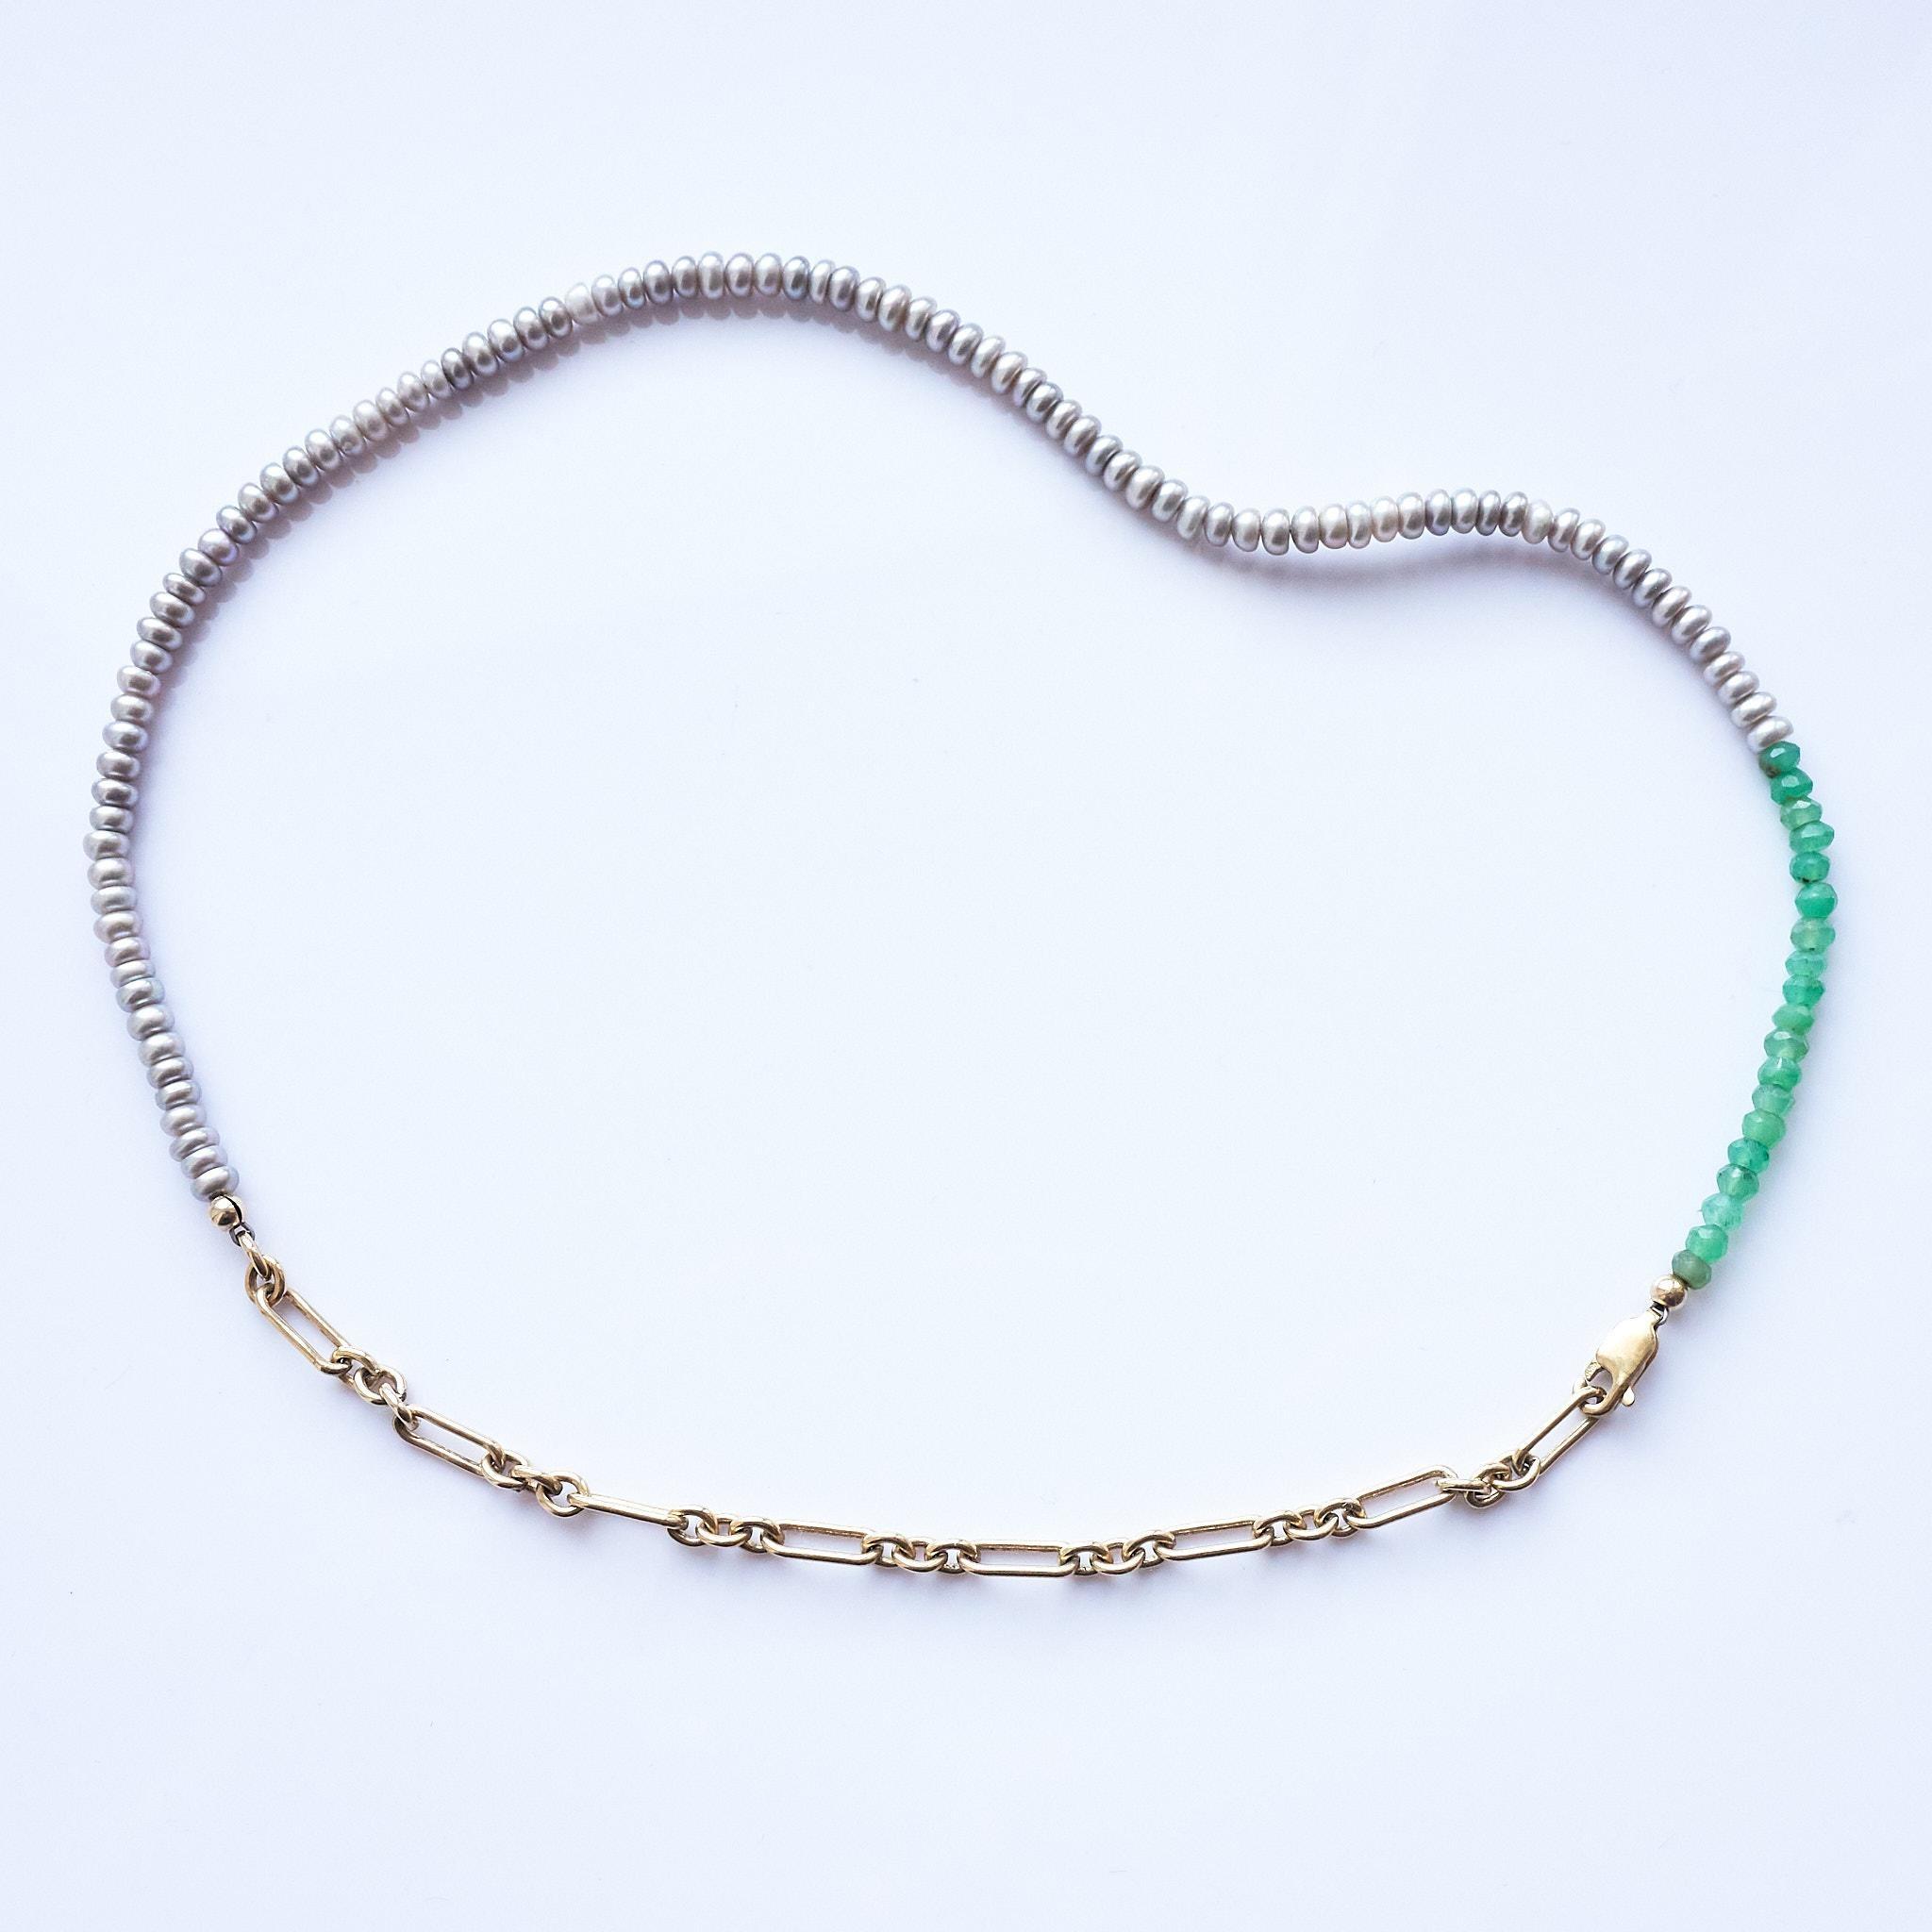 Pearl Necklace Choker Beaded Chrysoprase J Dauphin

